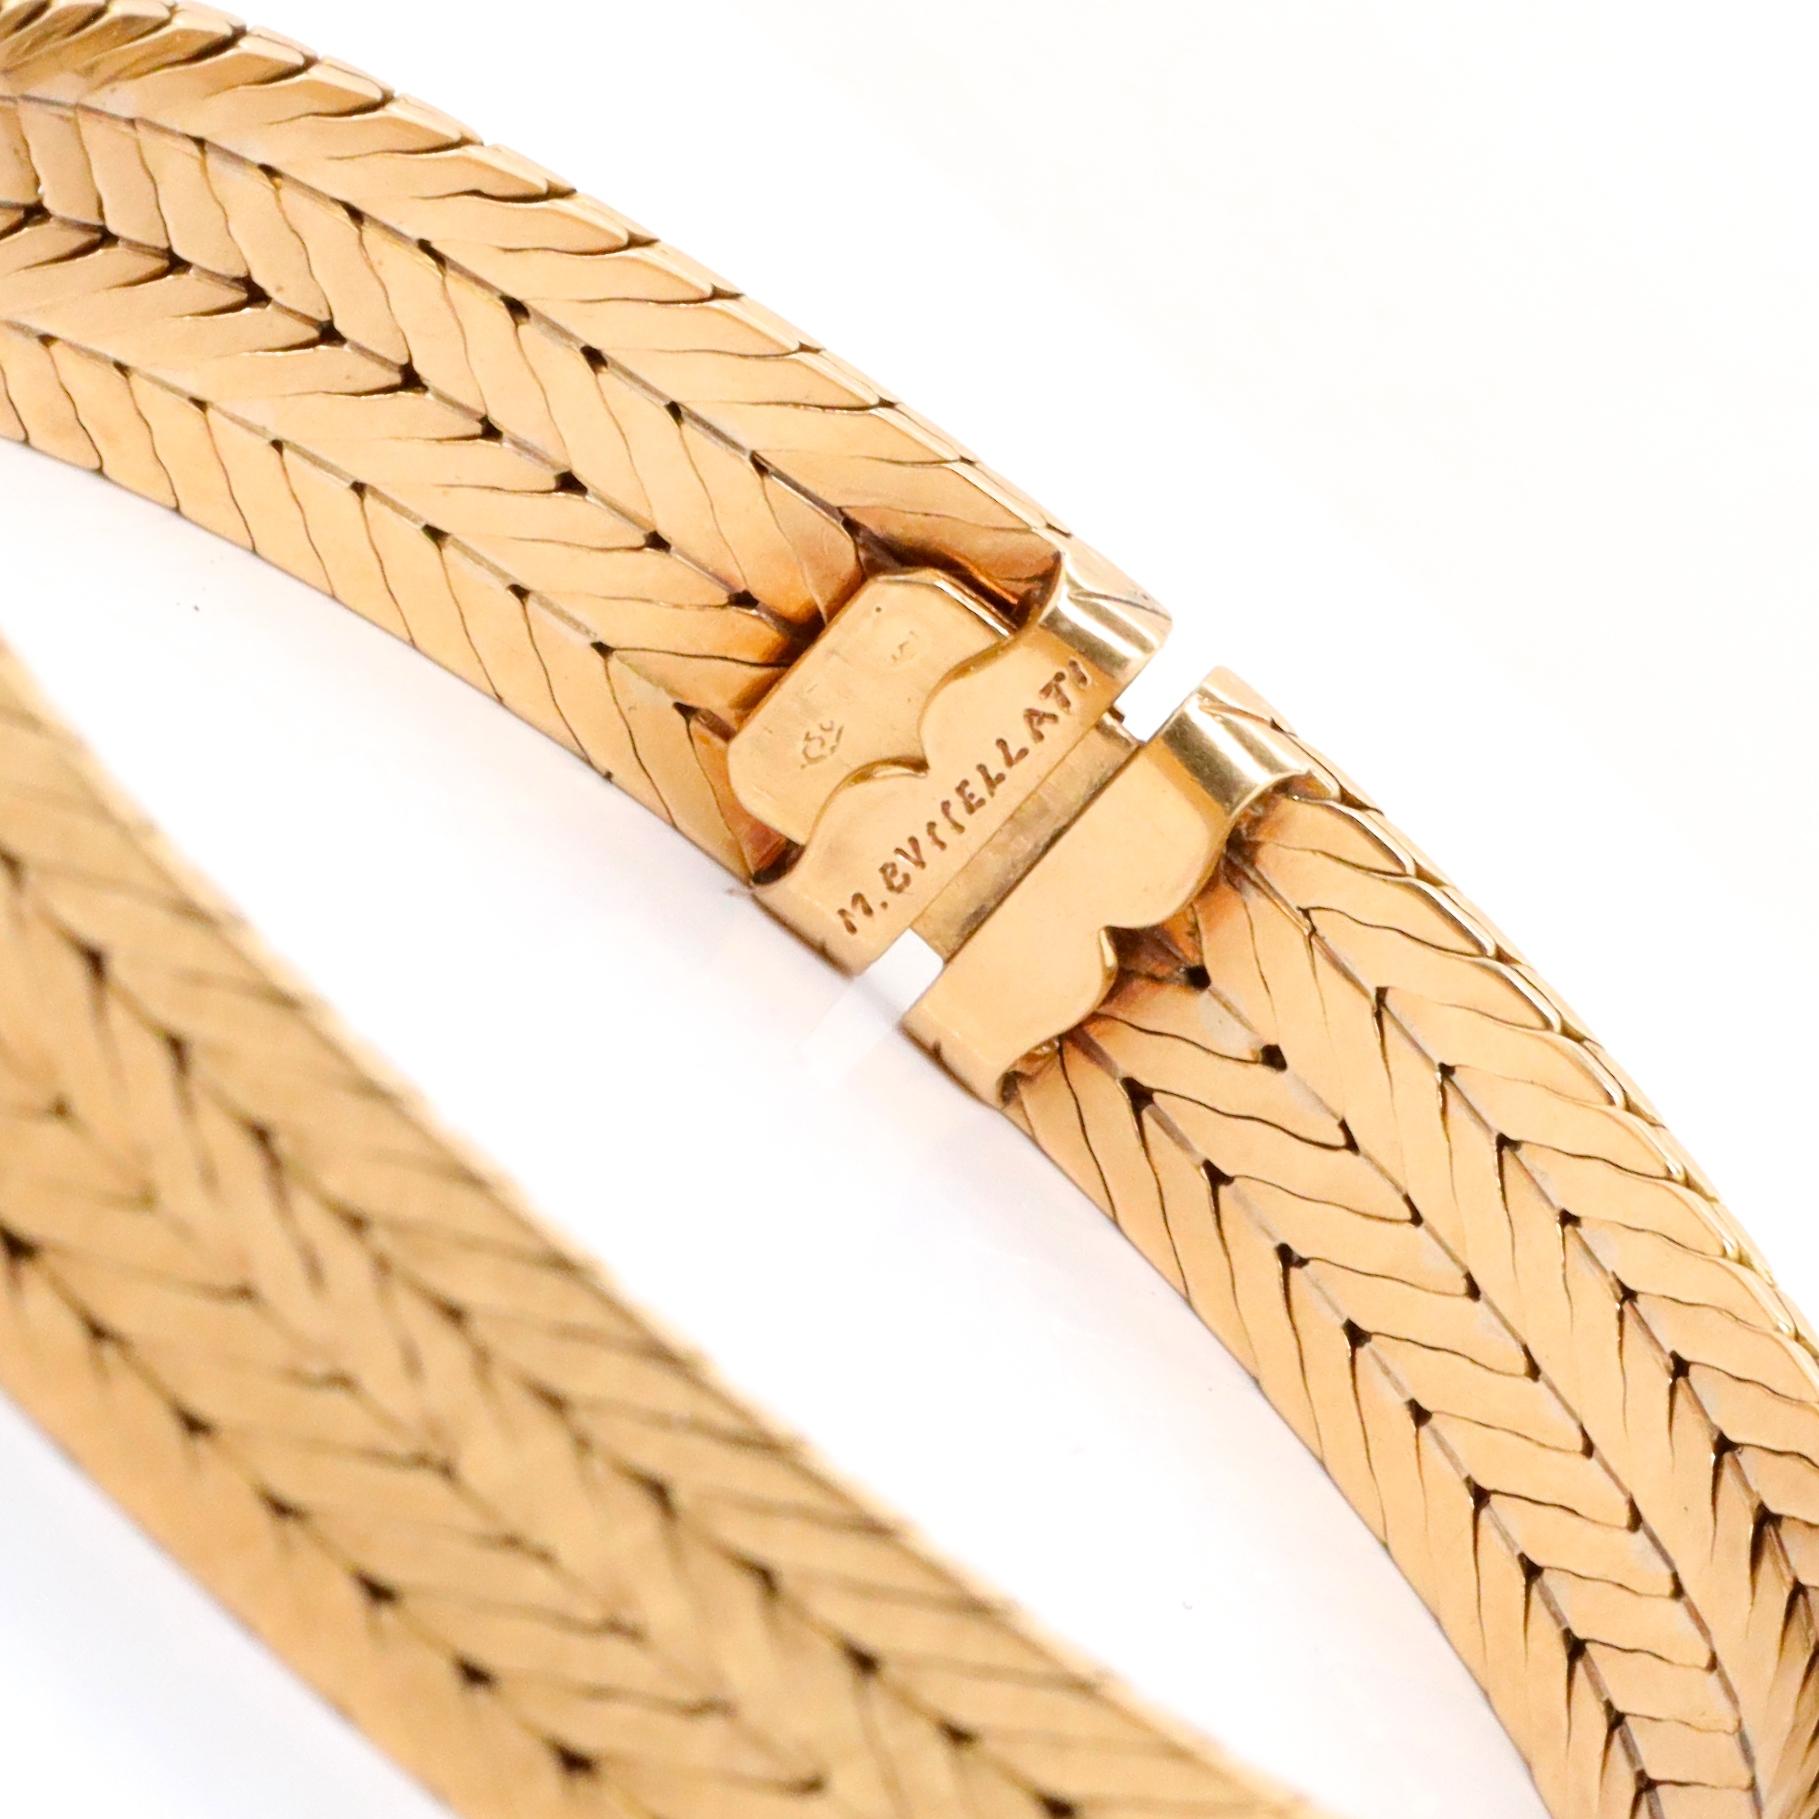 The unique herringbone design is signed by Mario Buccellati the true master of the house of Buccellati. This outstanding bracelet is not only great to wear but also satisfying to see in your estate jewelry box collection. Retro Mario Buccellati 18k